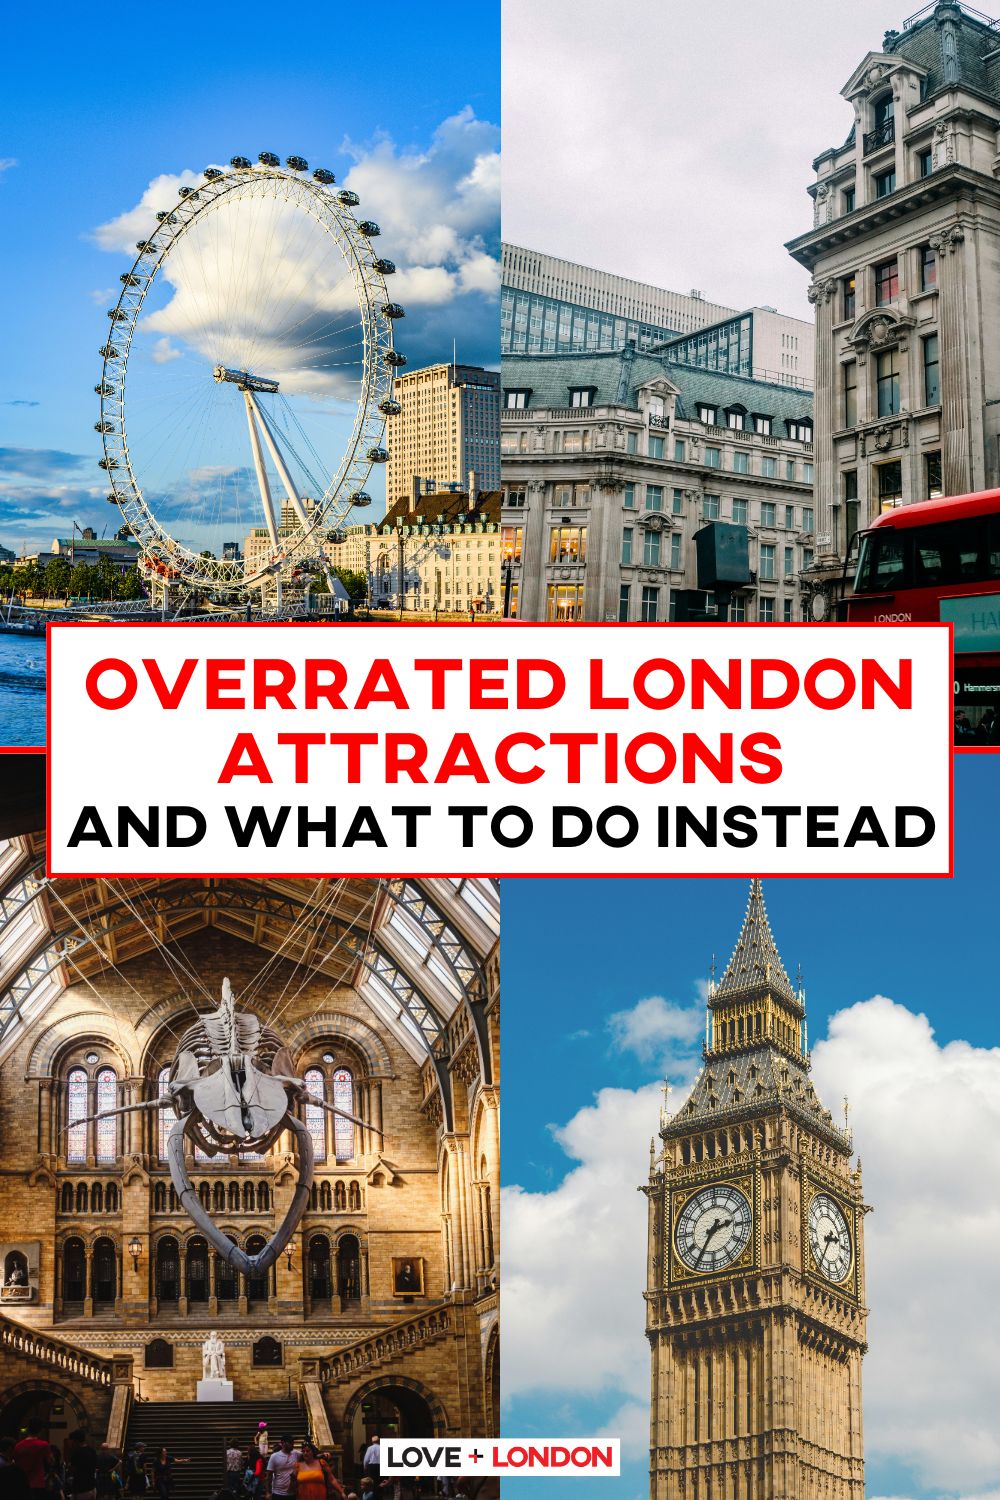 This is a Pinterest pin that details overrated attractions in London and what to do instead.